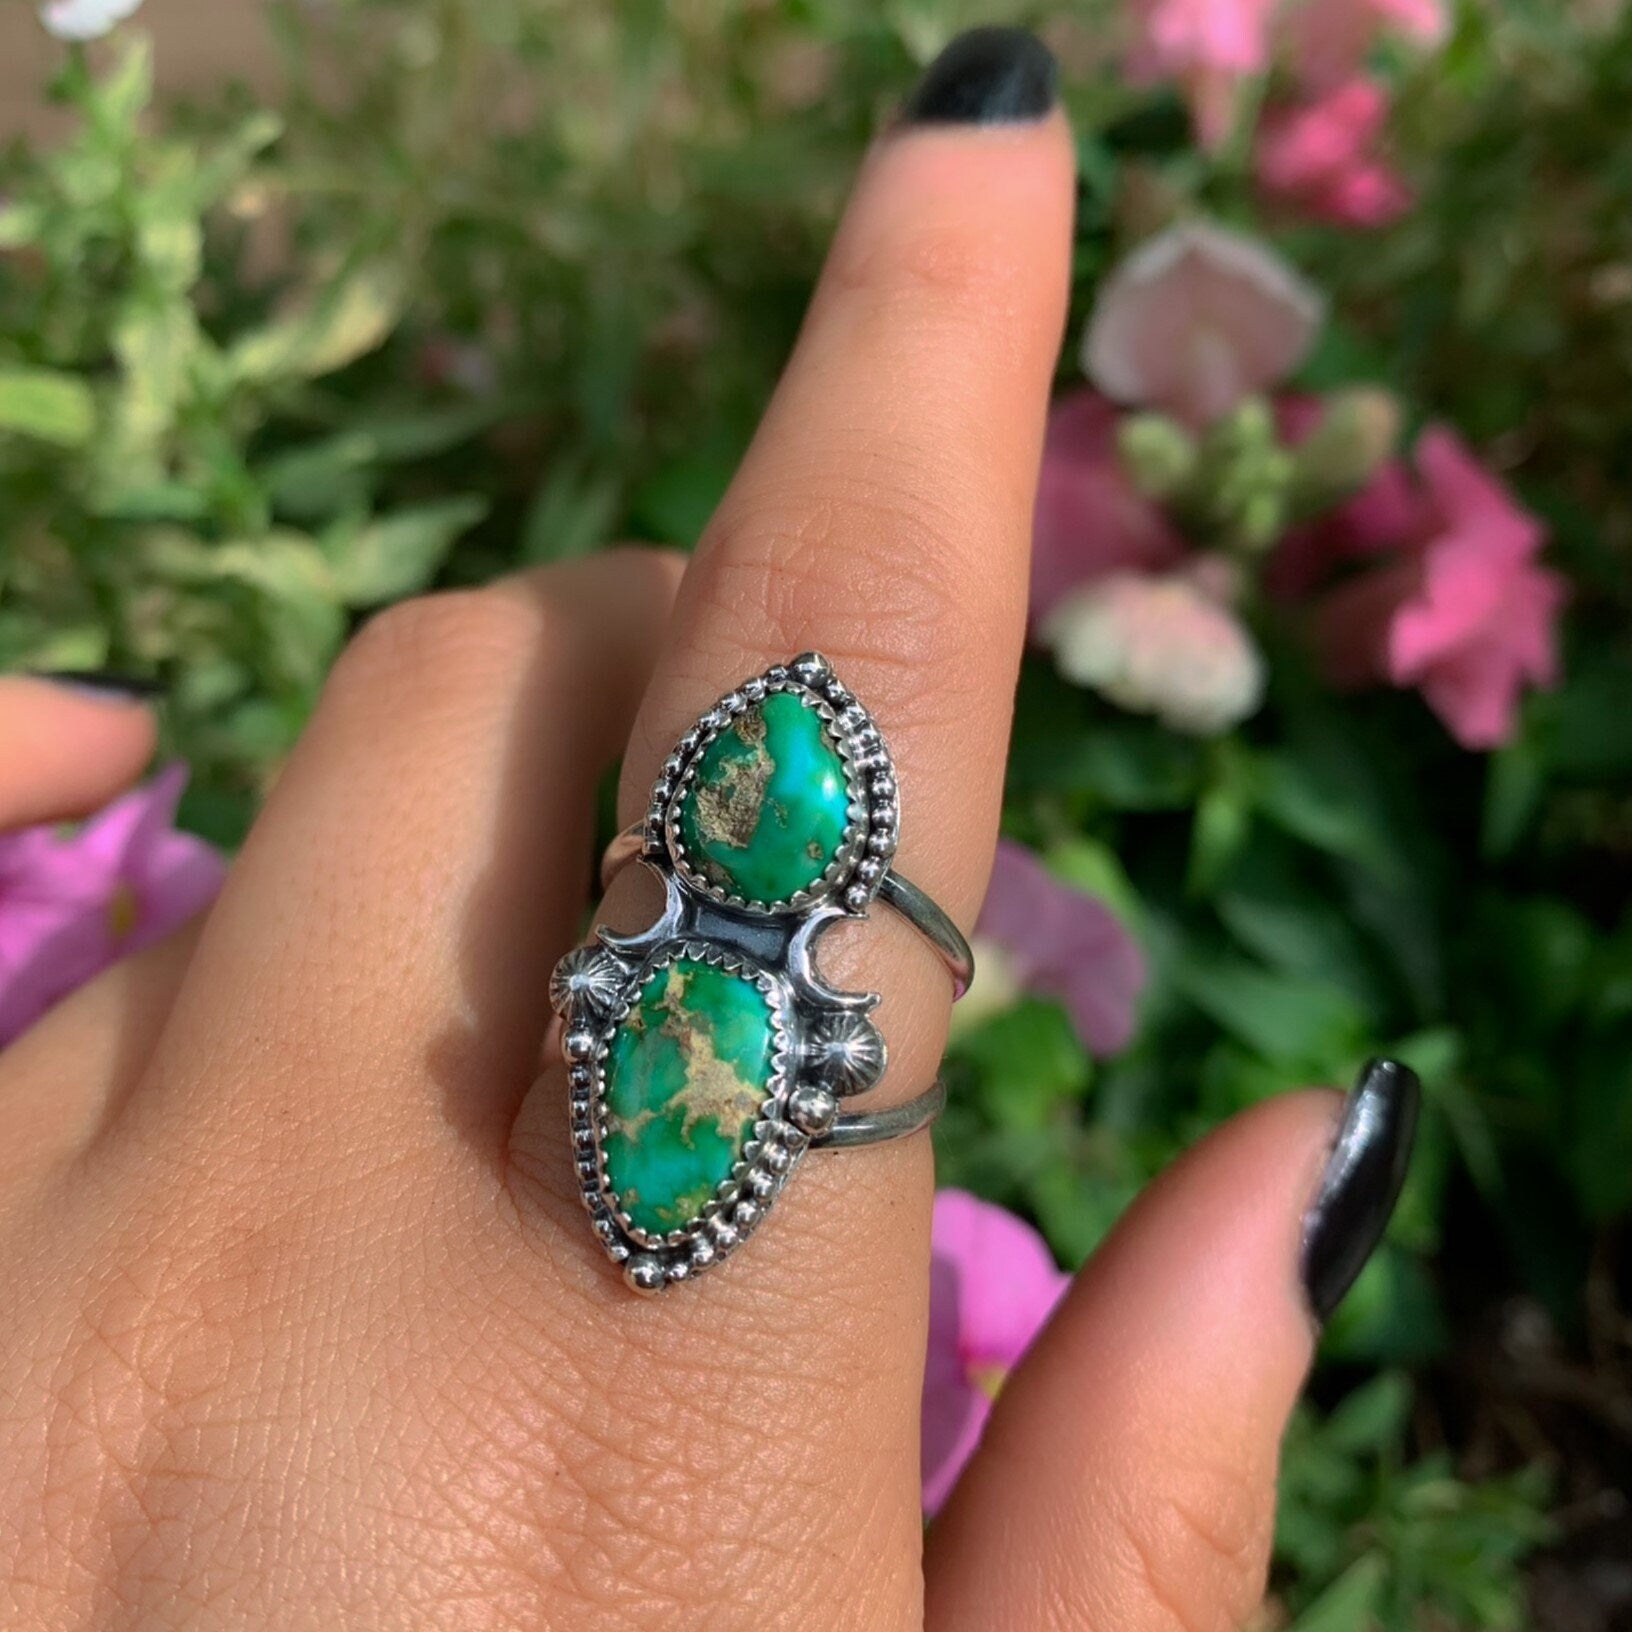 Sonoran Gold Turquoise Ring - Size 7 1/2 - Sterling Silver - Green Turquoise Jewellery - Aqua Turquoise Jewelry - Double Turquoise Ring